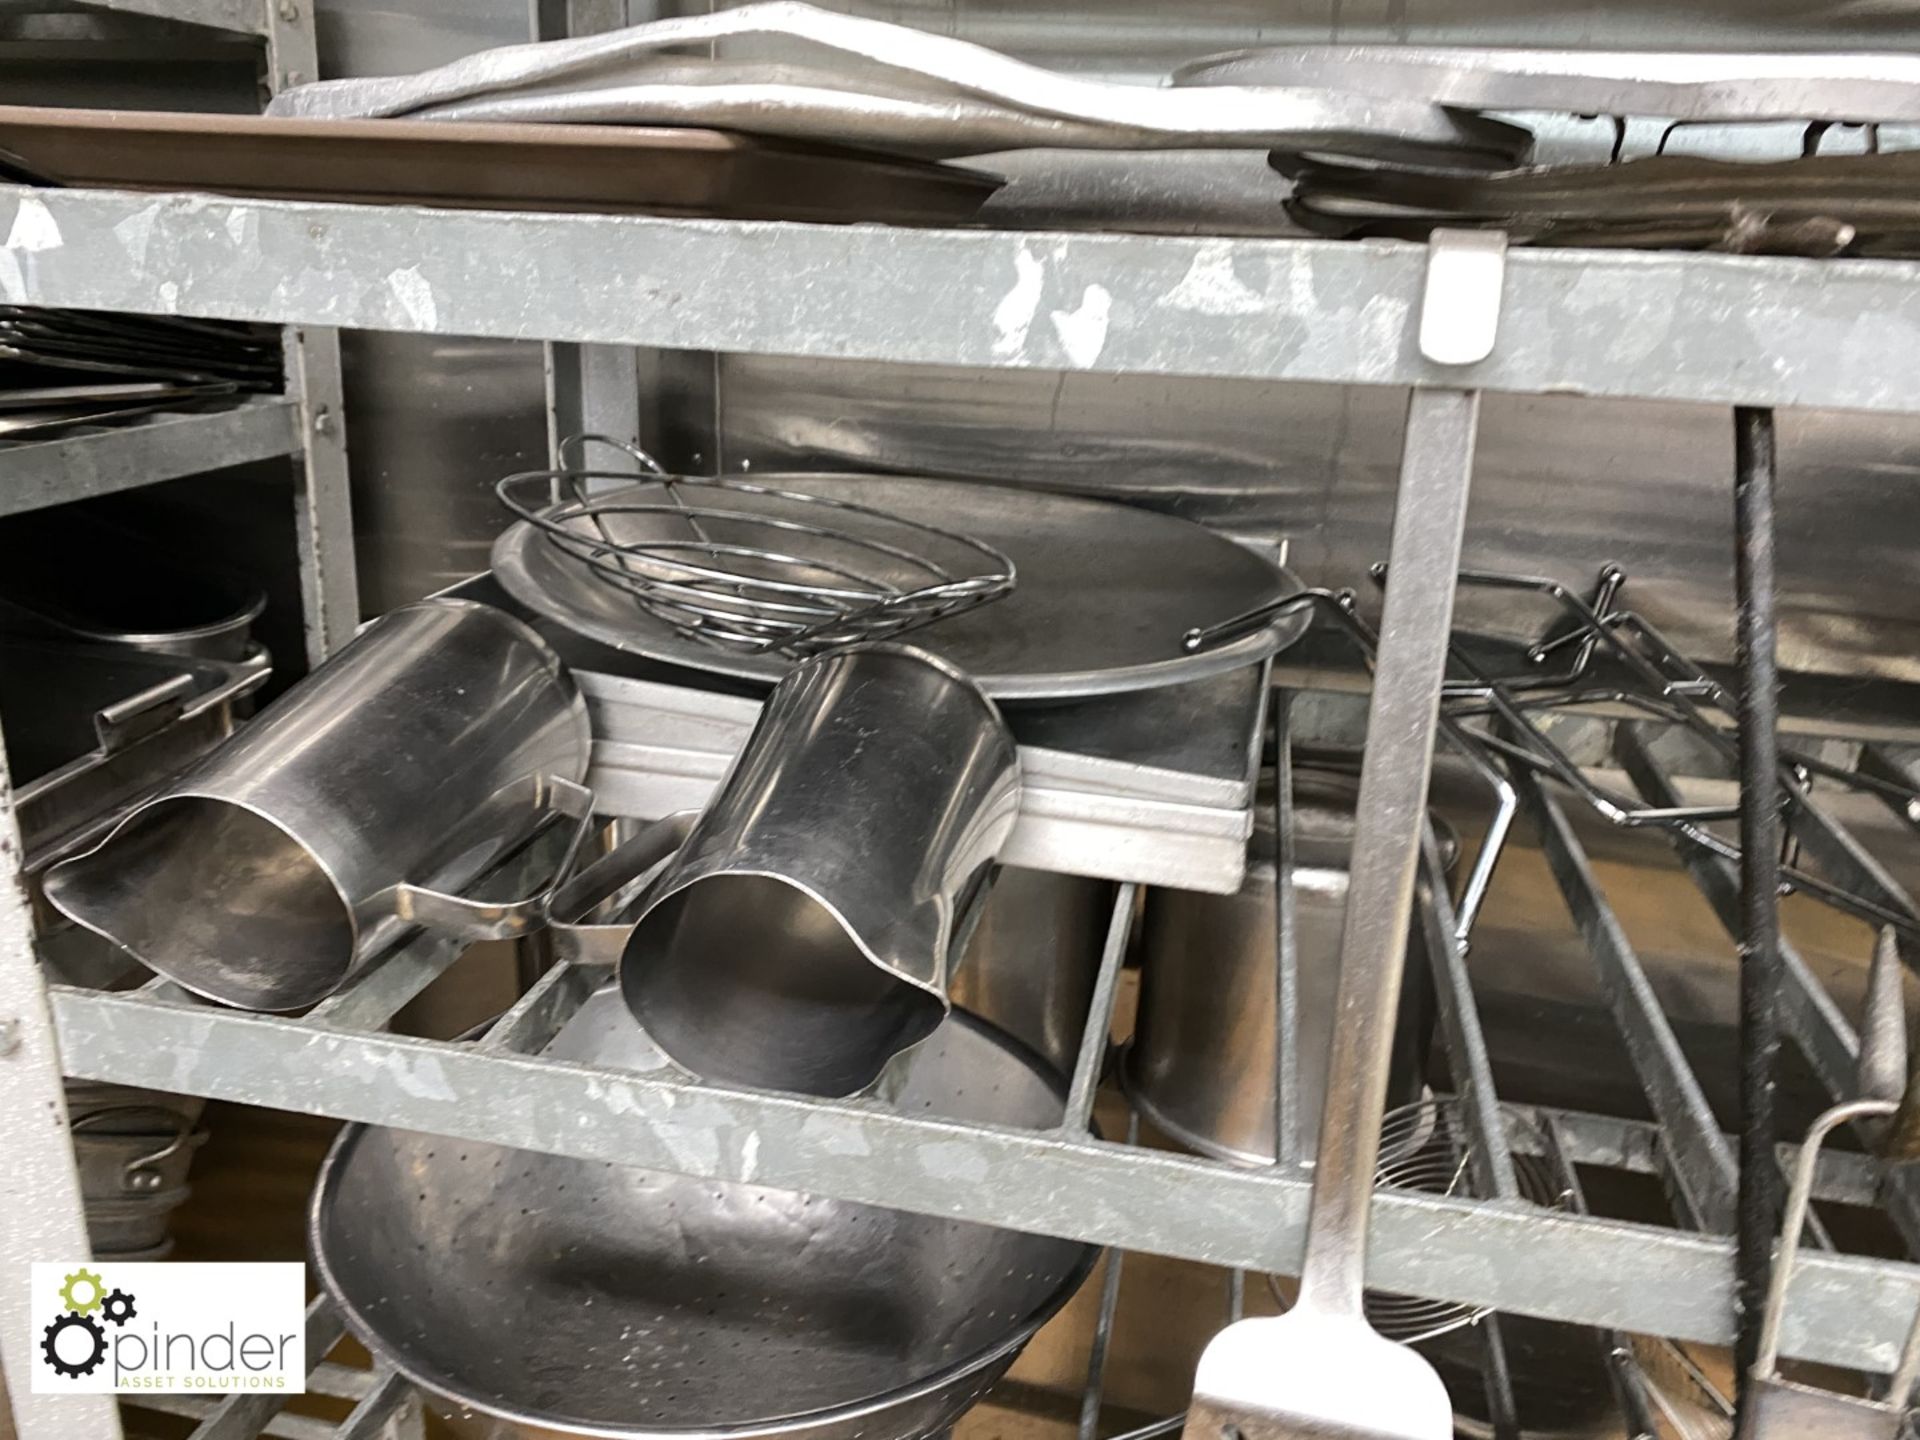 Large quantity Cooking Pots, Sieves, Trays, Pans, etc, to rack (located in Pot Wash Room, - Image 6 of 11